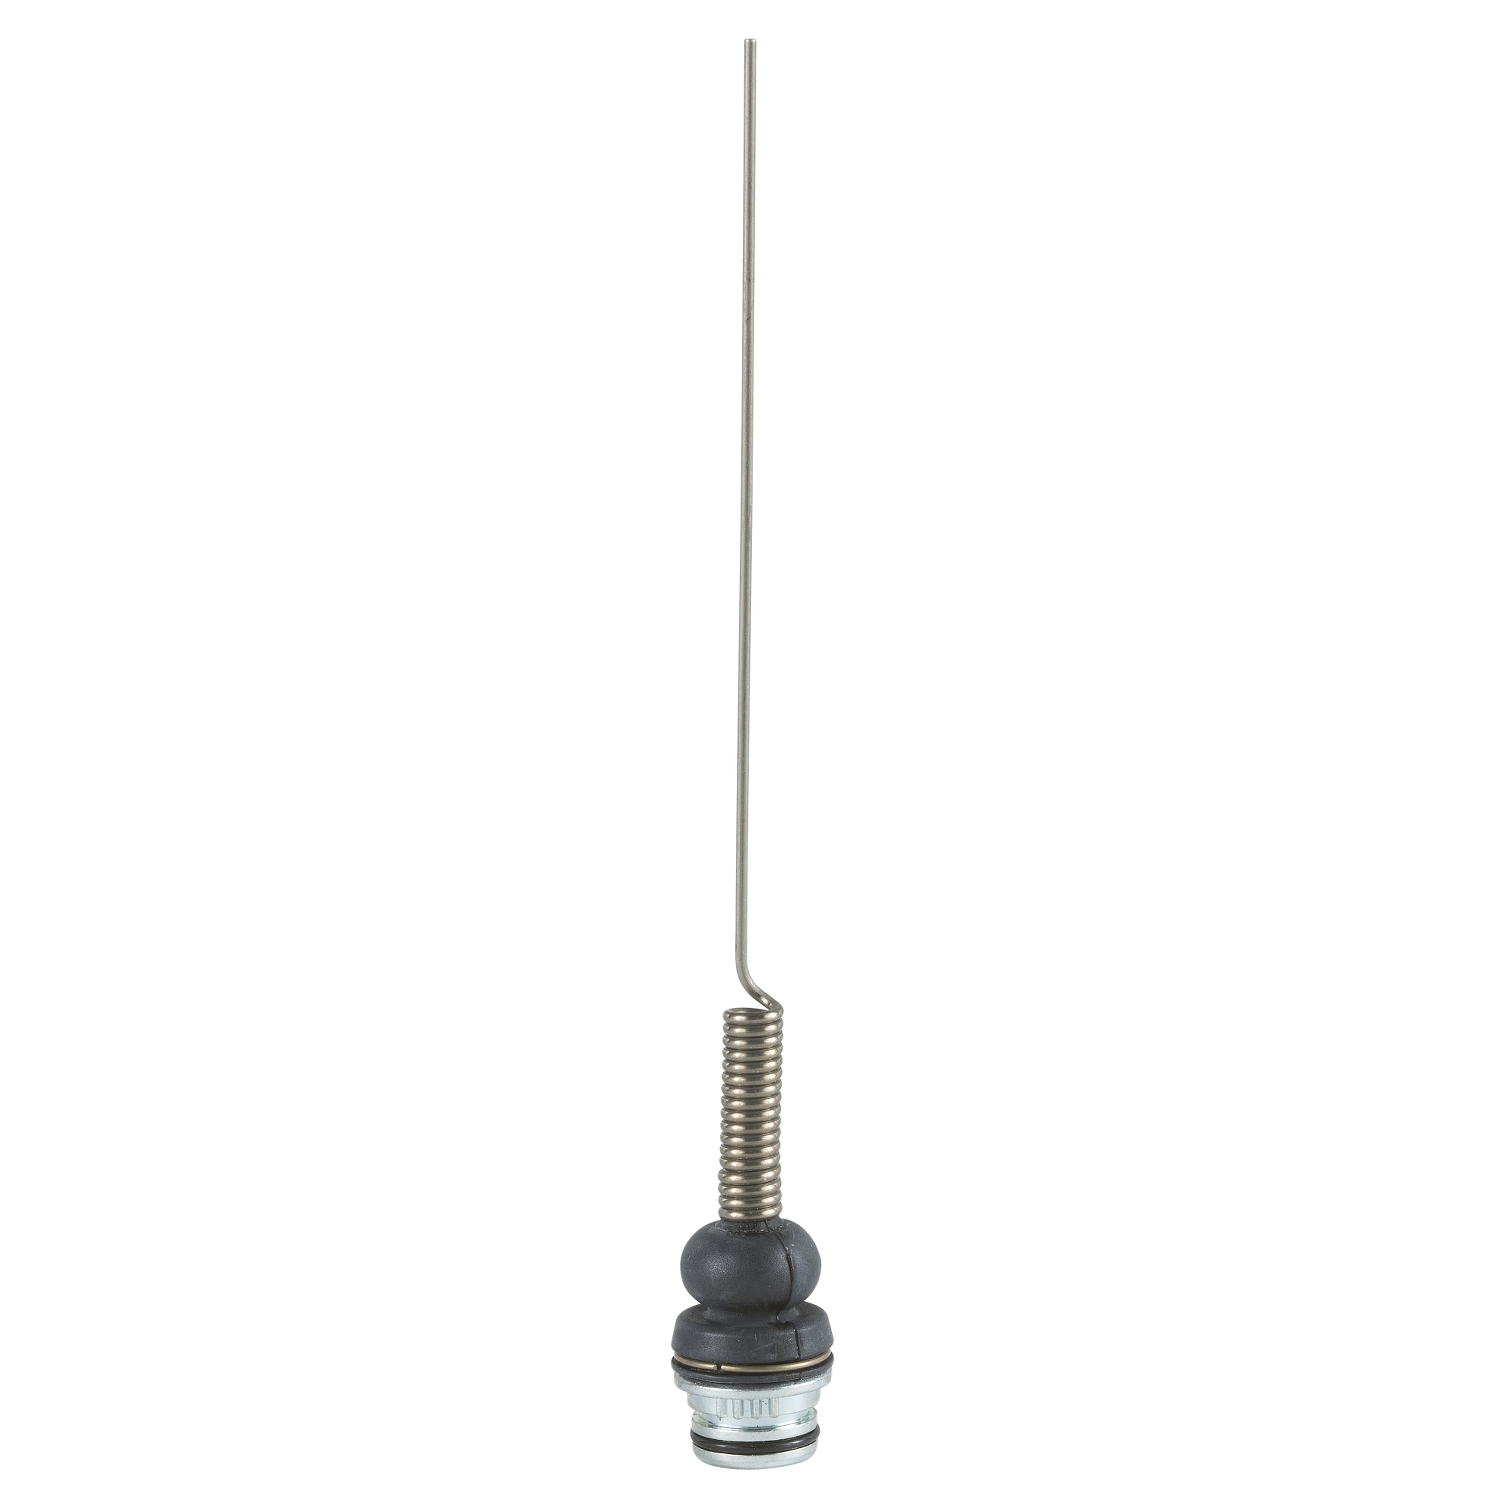 Limit switch head, Limit switches XC Standard, ZCE, cat's whisker with nitrile boot